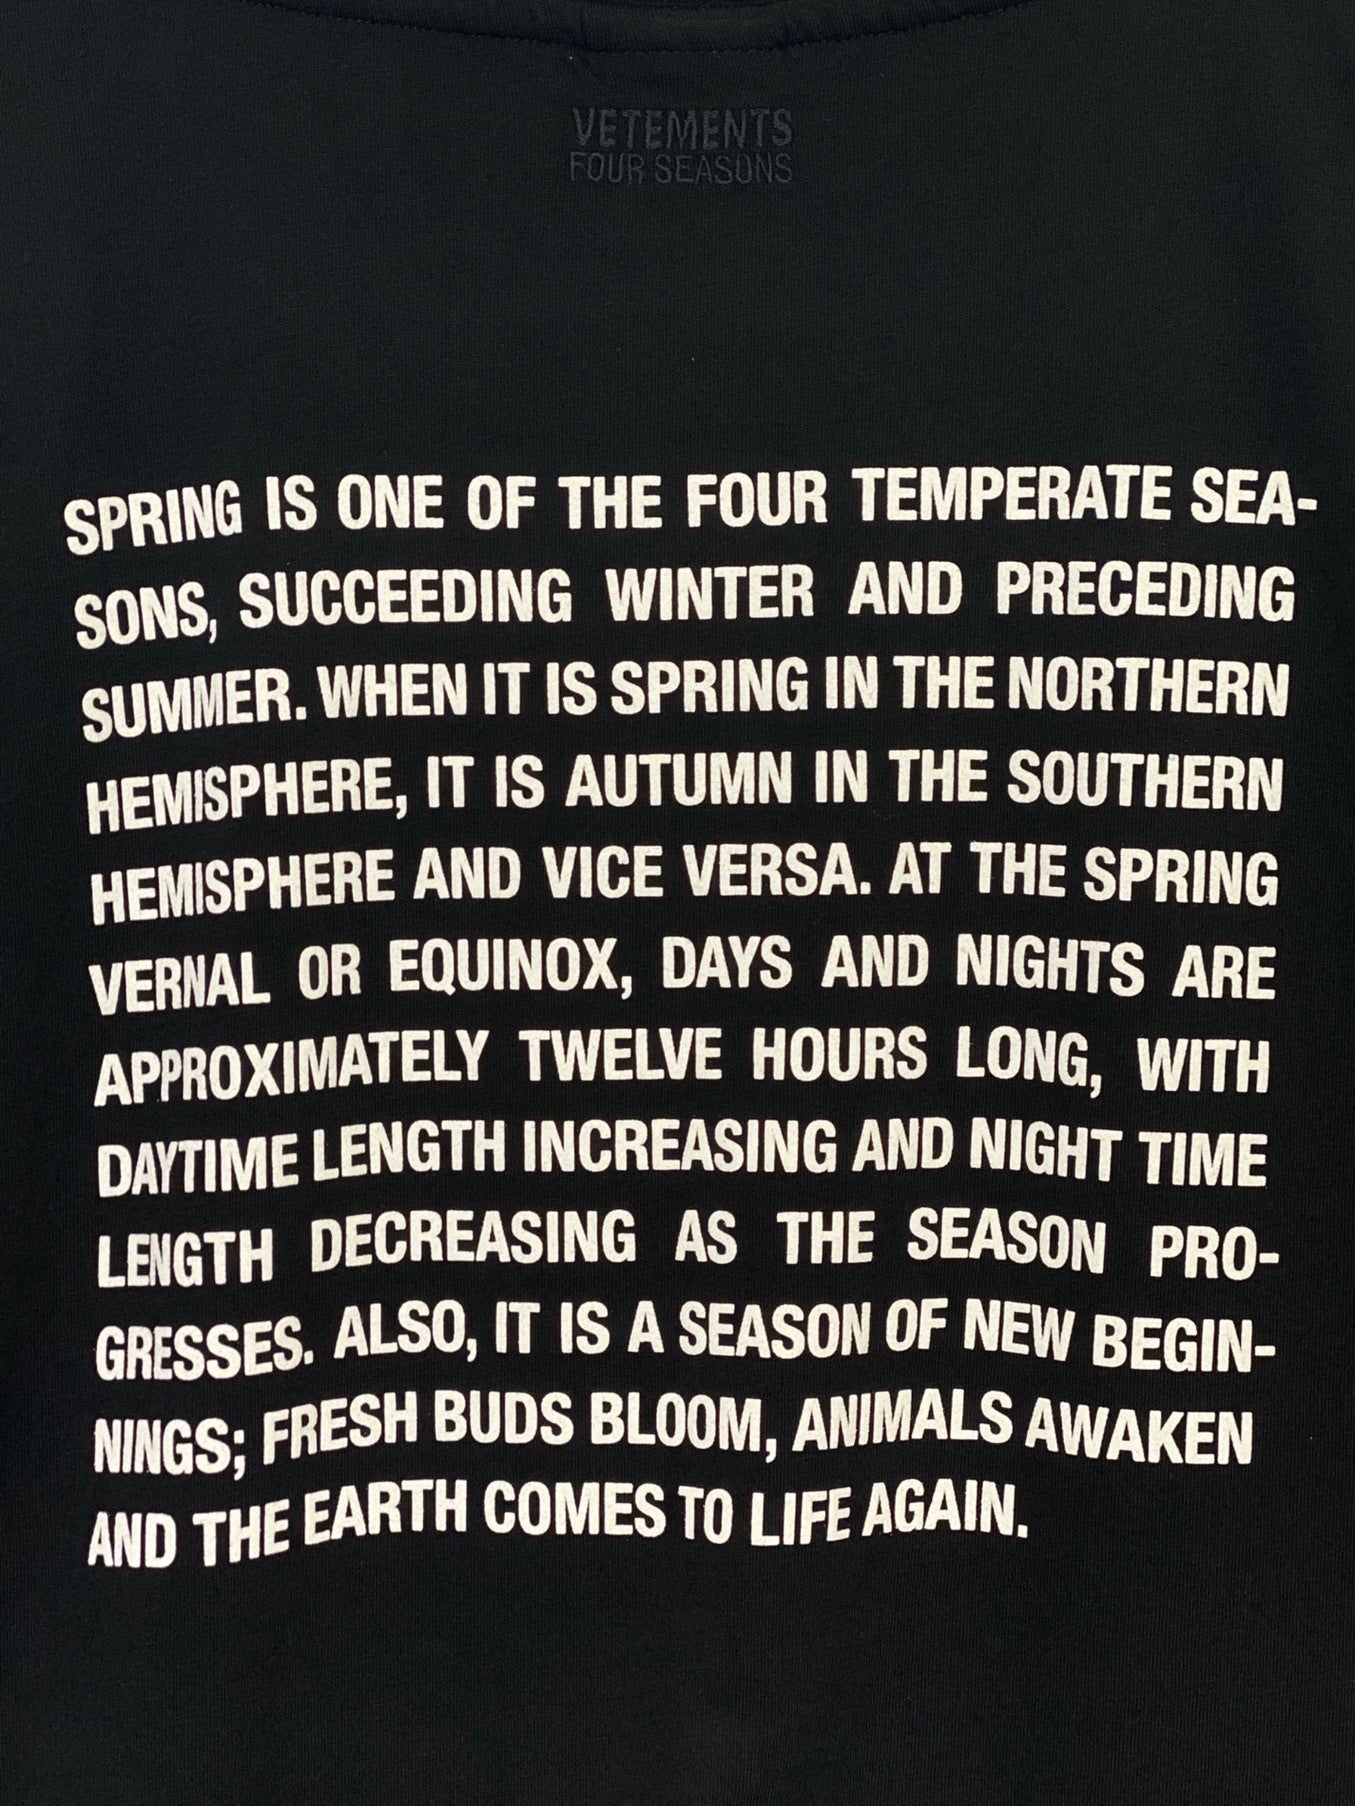 Vetements x Four Seasons Limited Spring T-Shirt